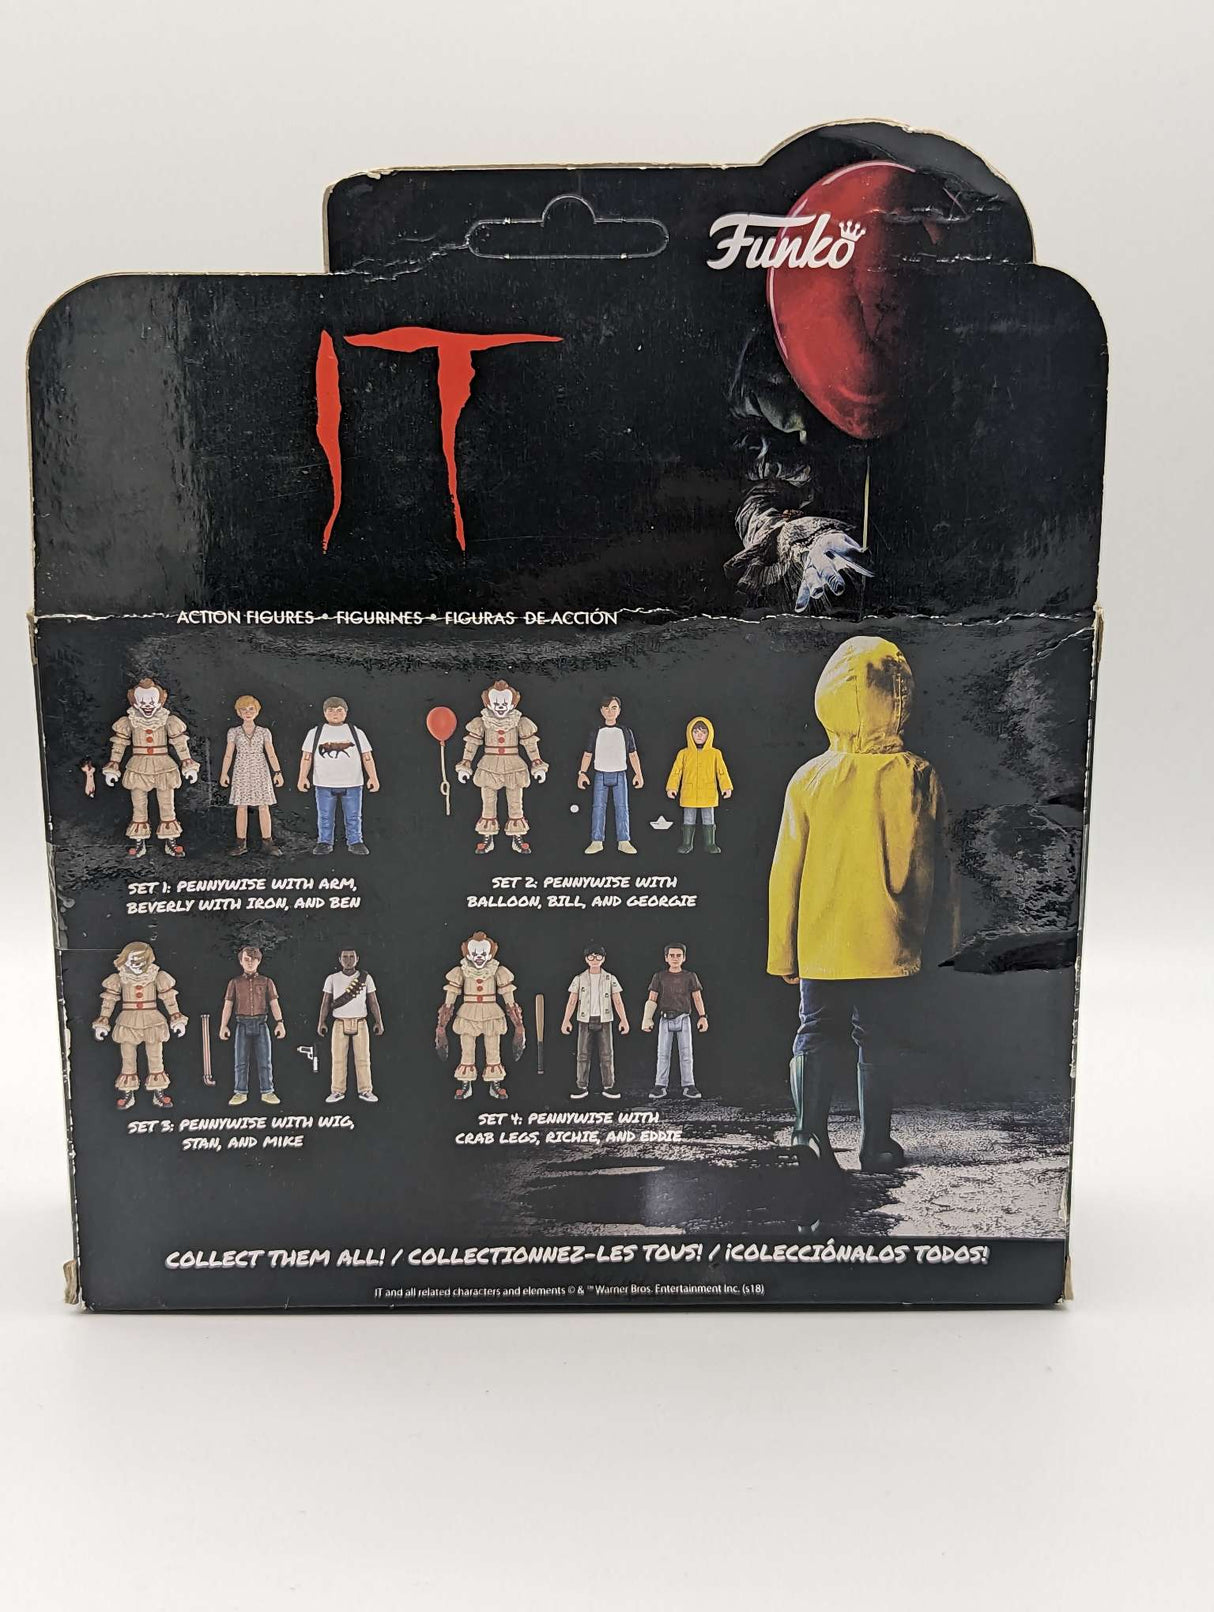 Funko Action Figure | I.T Pennywise / Stan / Mike